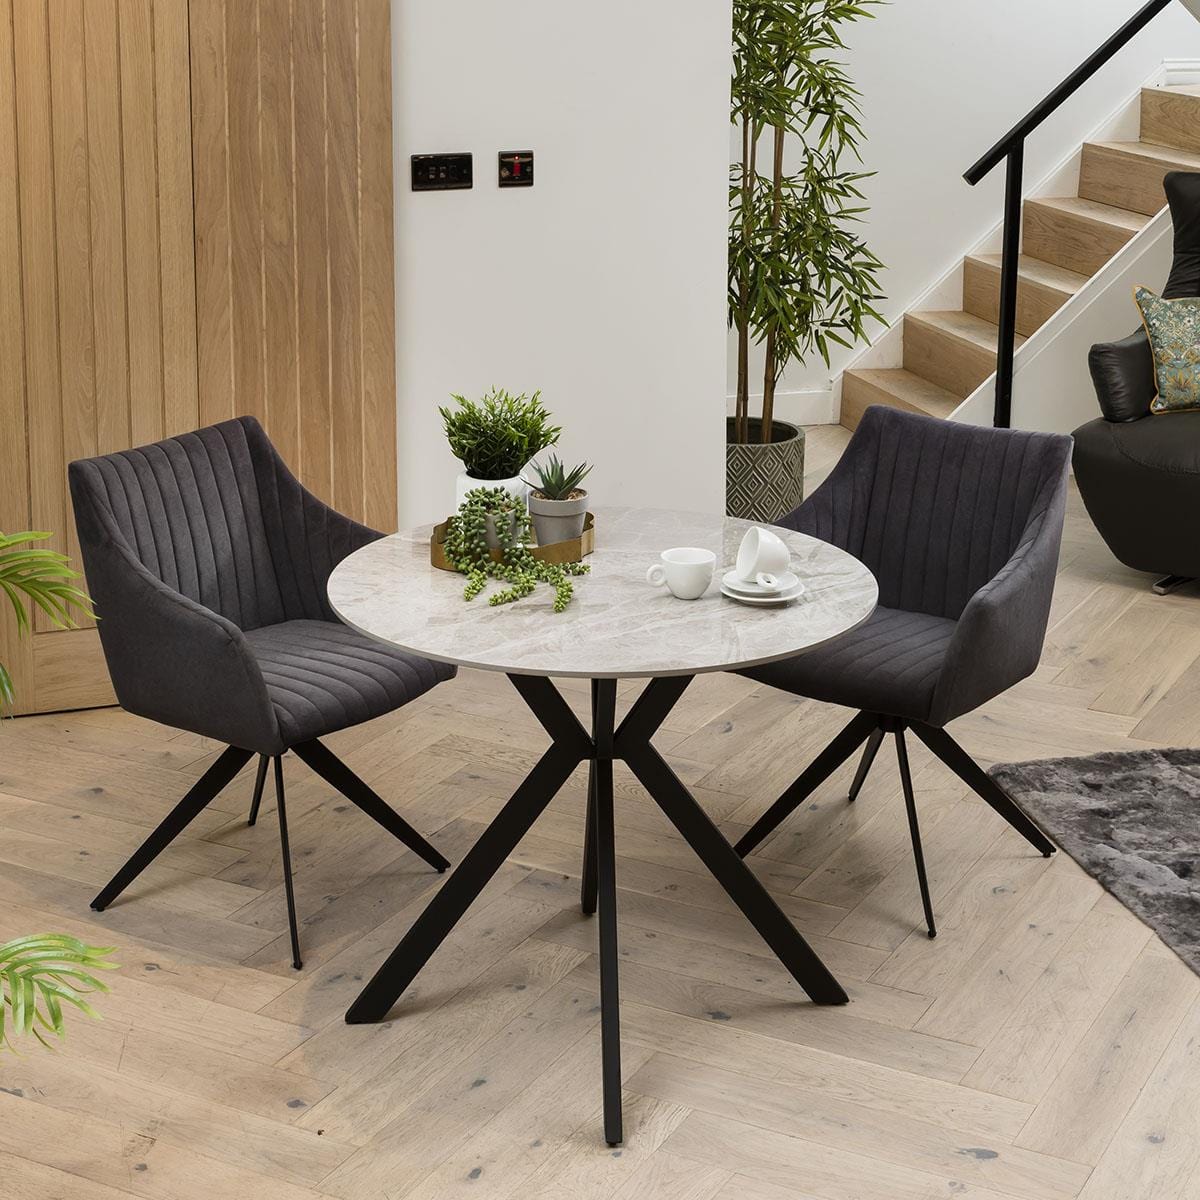 Quatropi 2 Seater Grey Ceramic Round Dining Table And Carver Dining Chairs With Arms